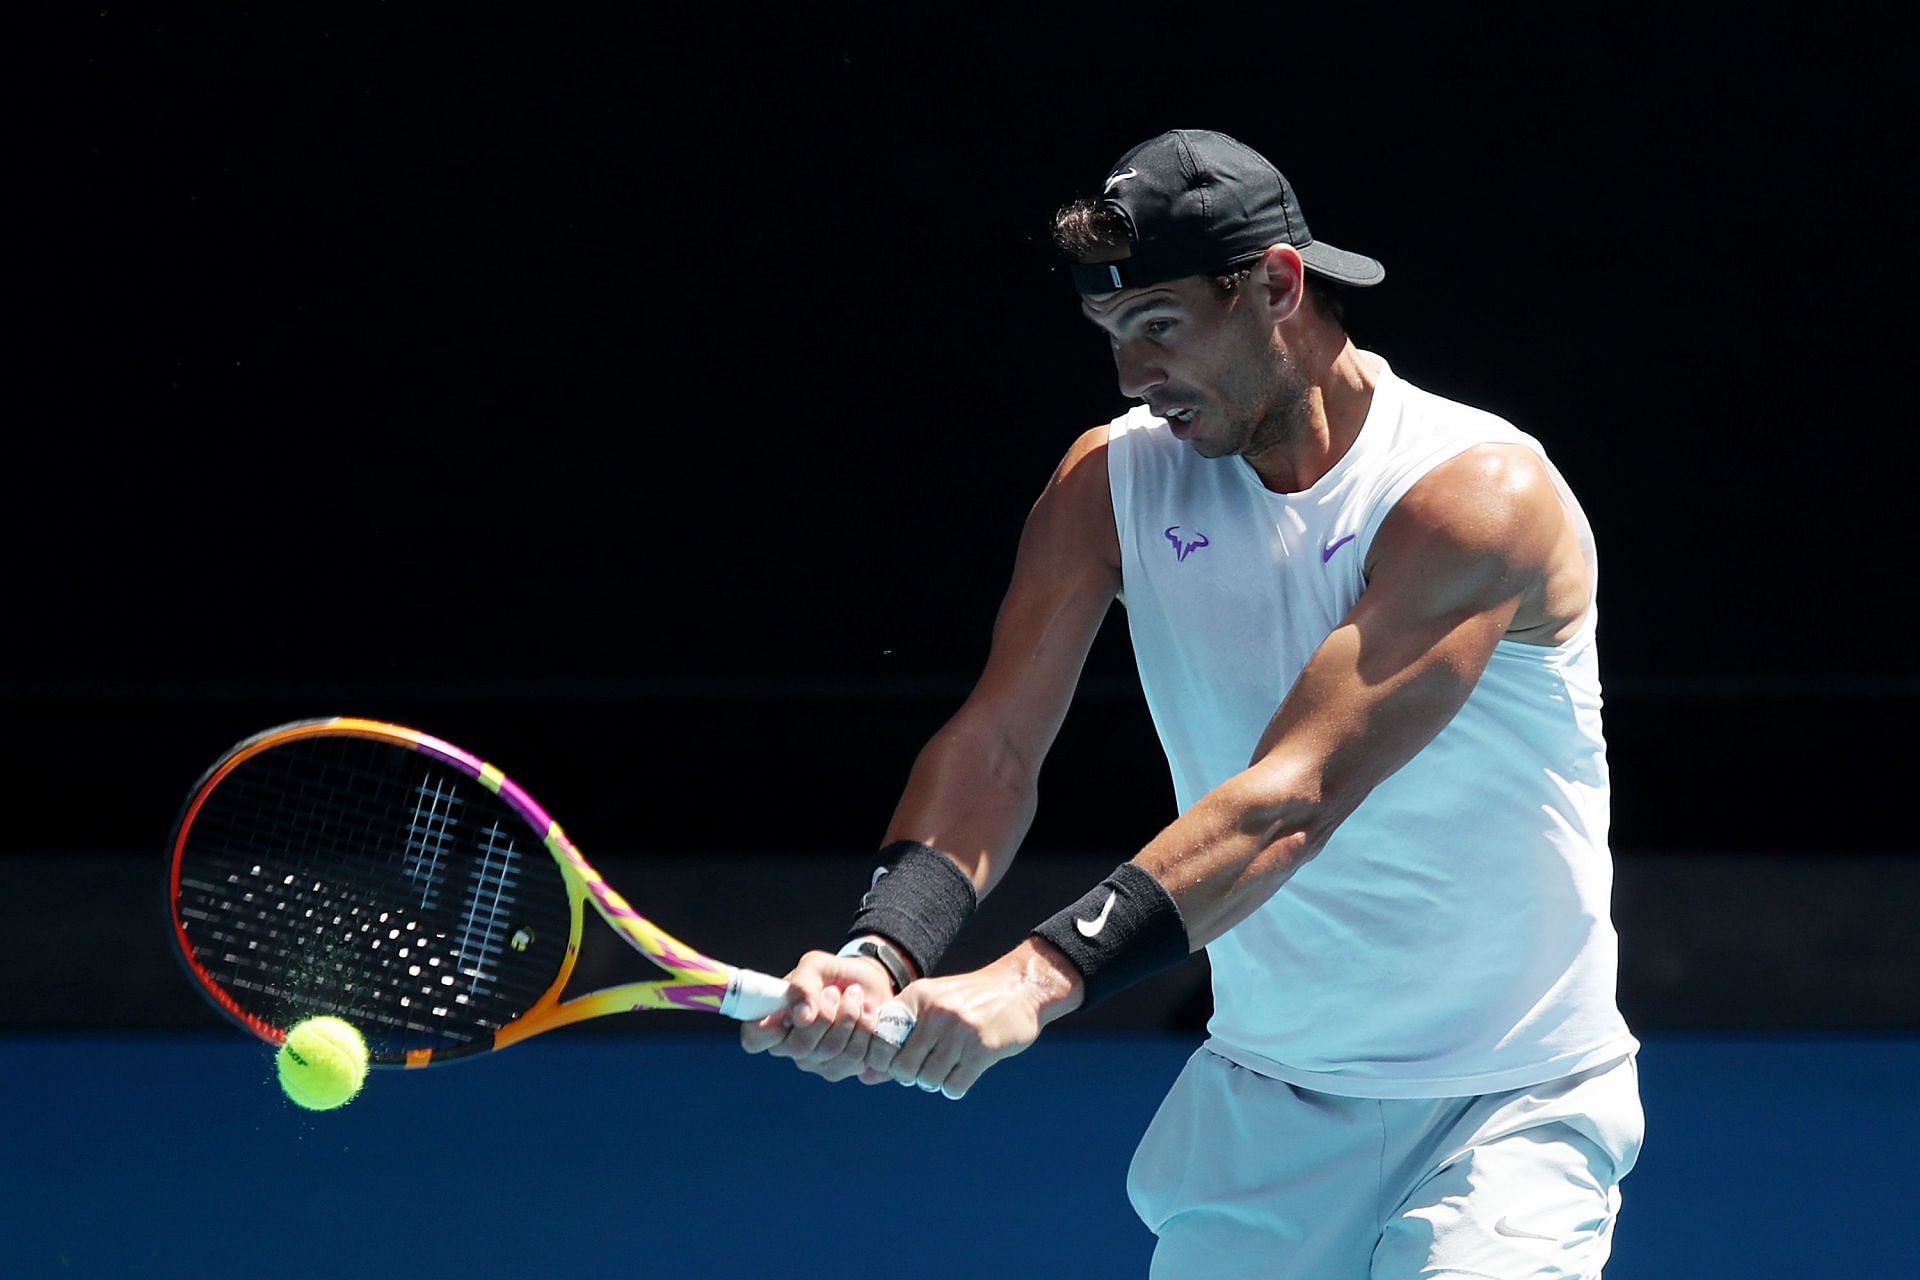 Rafael Nadal unloads on a backhand at the Rod Laver Arena on Wednesday